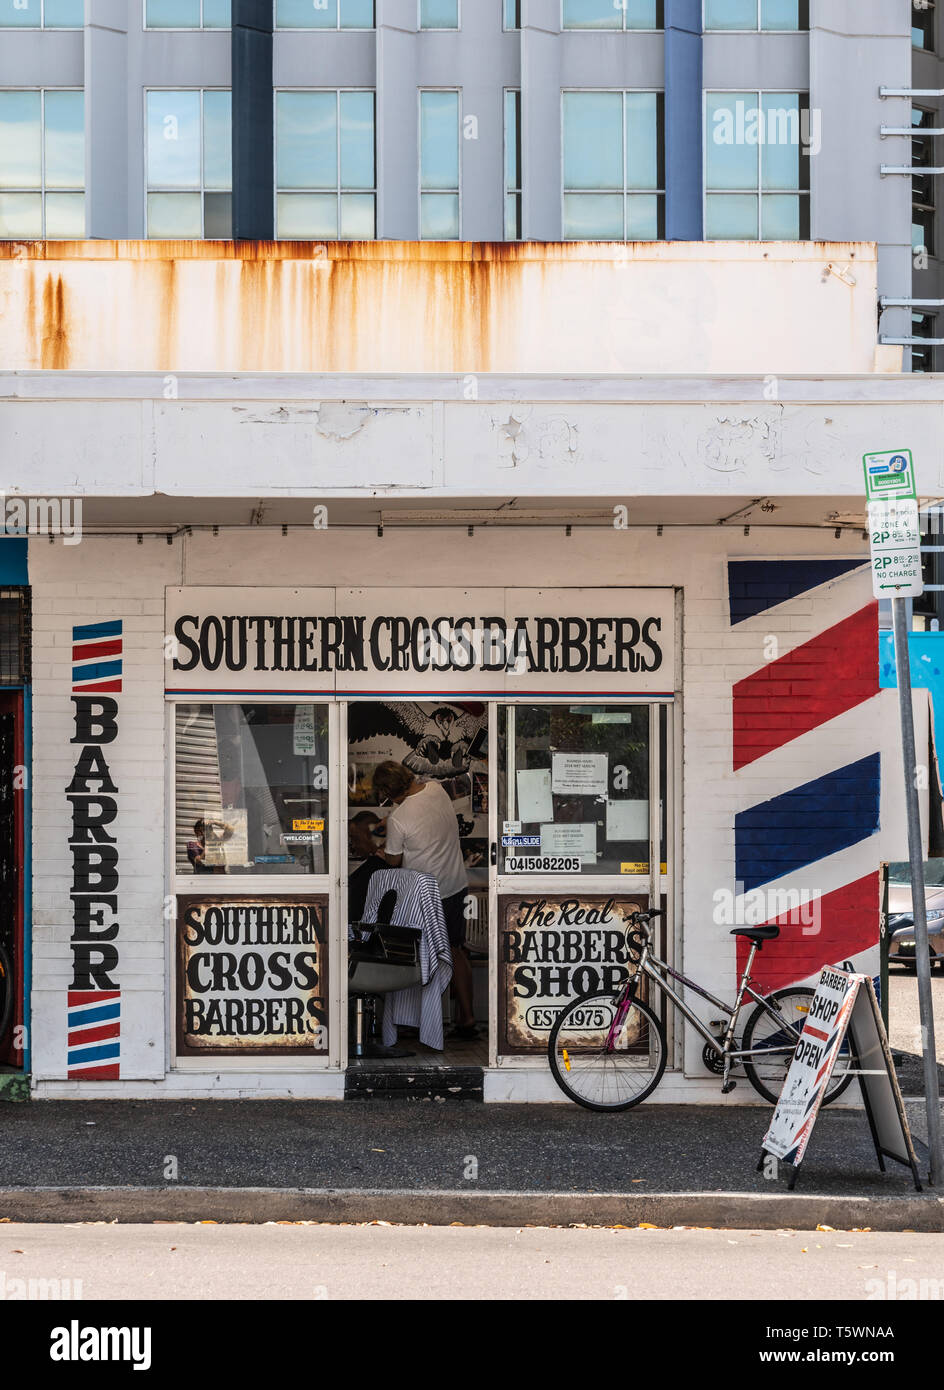 Darwin Australia - February 22, 2019: Small iconic Southern Cross shop in Bennett Street shows classic white and red Barber Stock Photo - Alamy